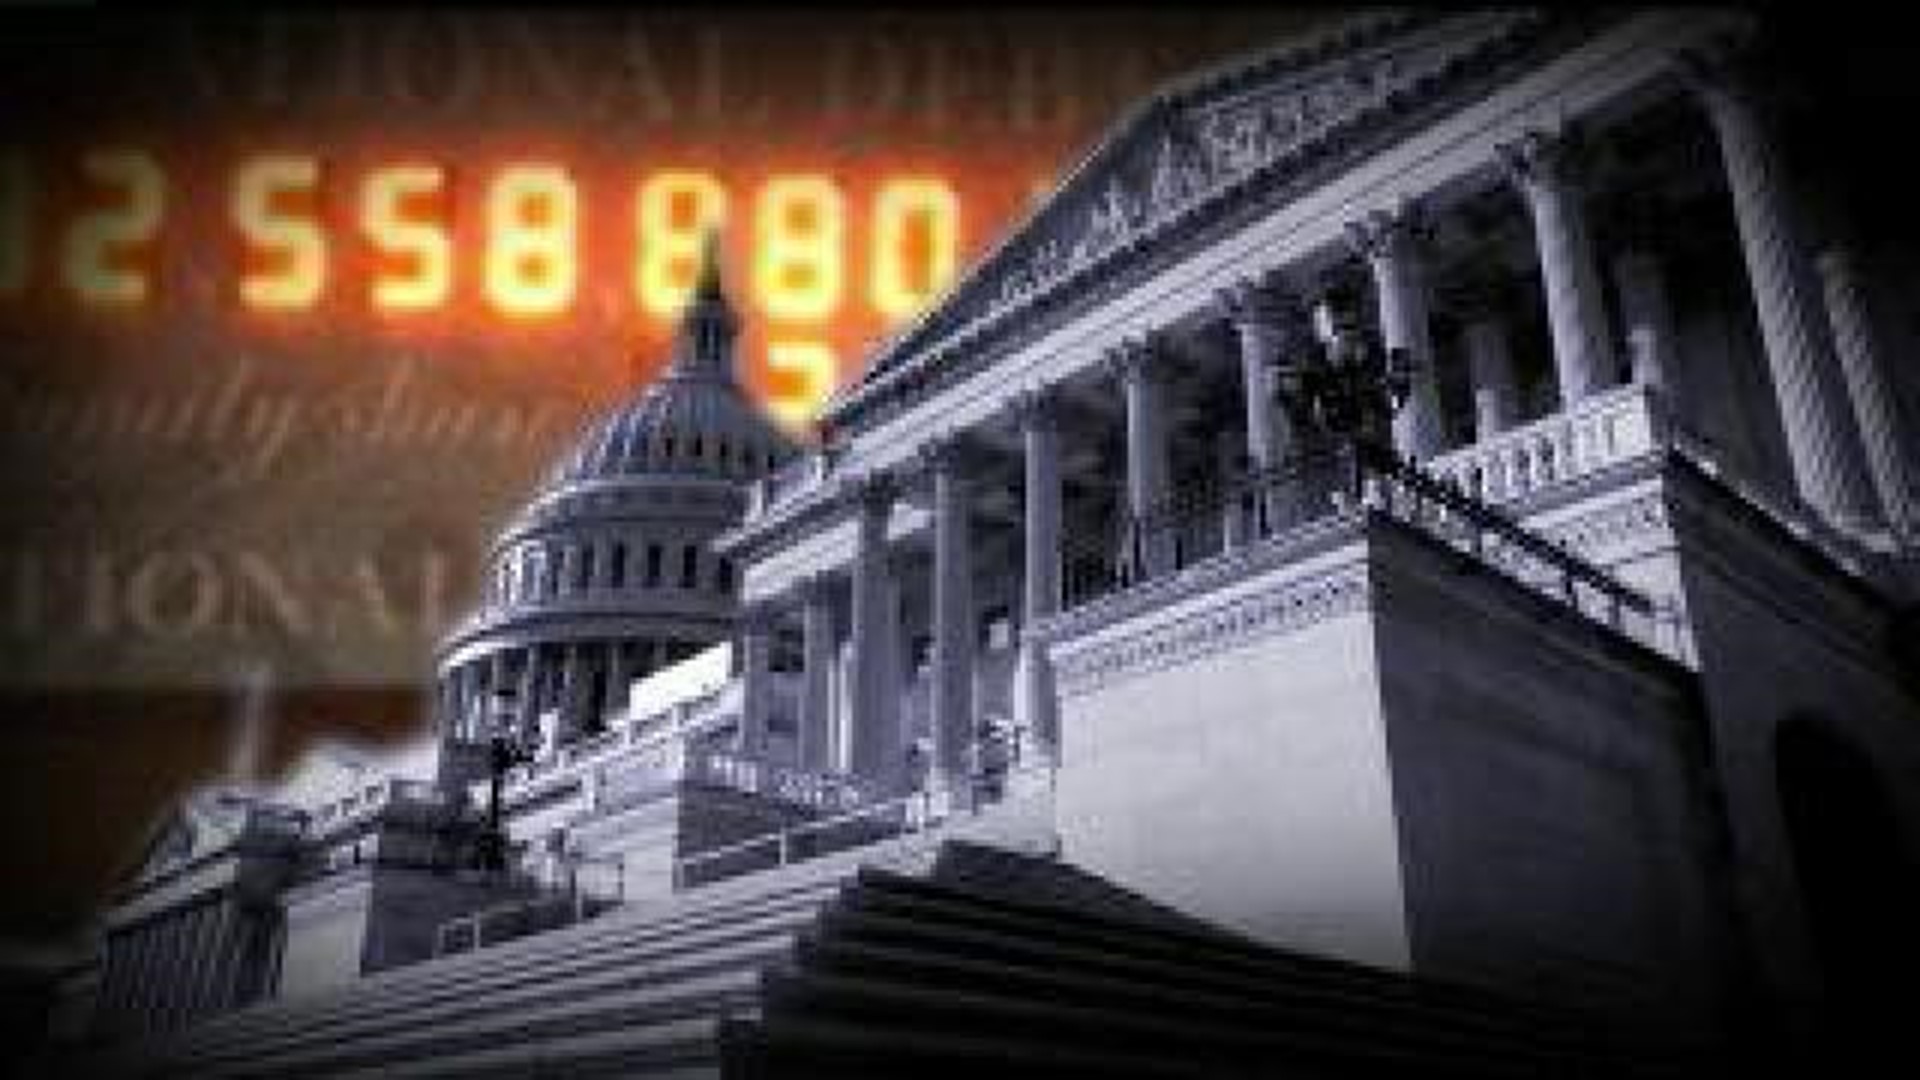 No deal yet reached in government shutdown